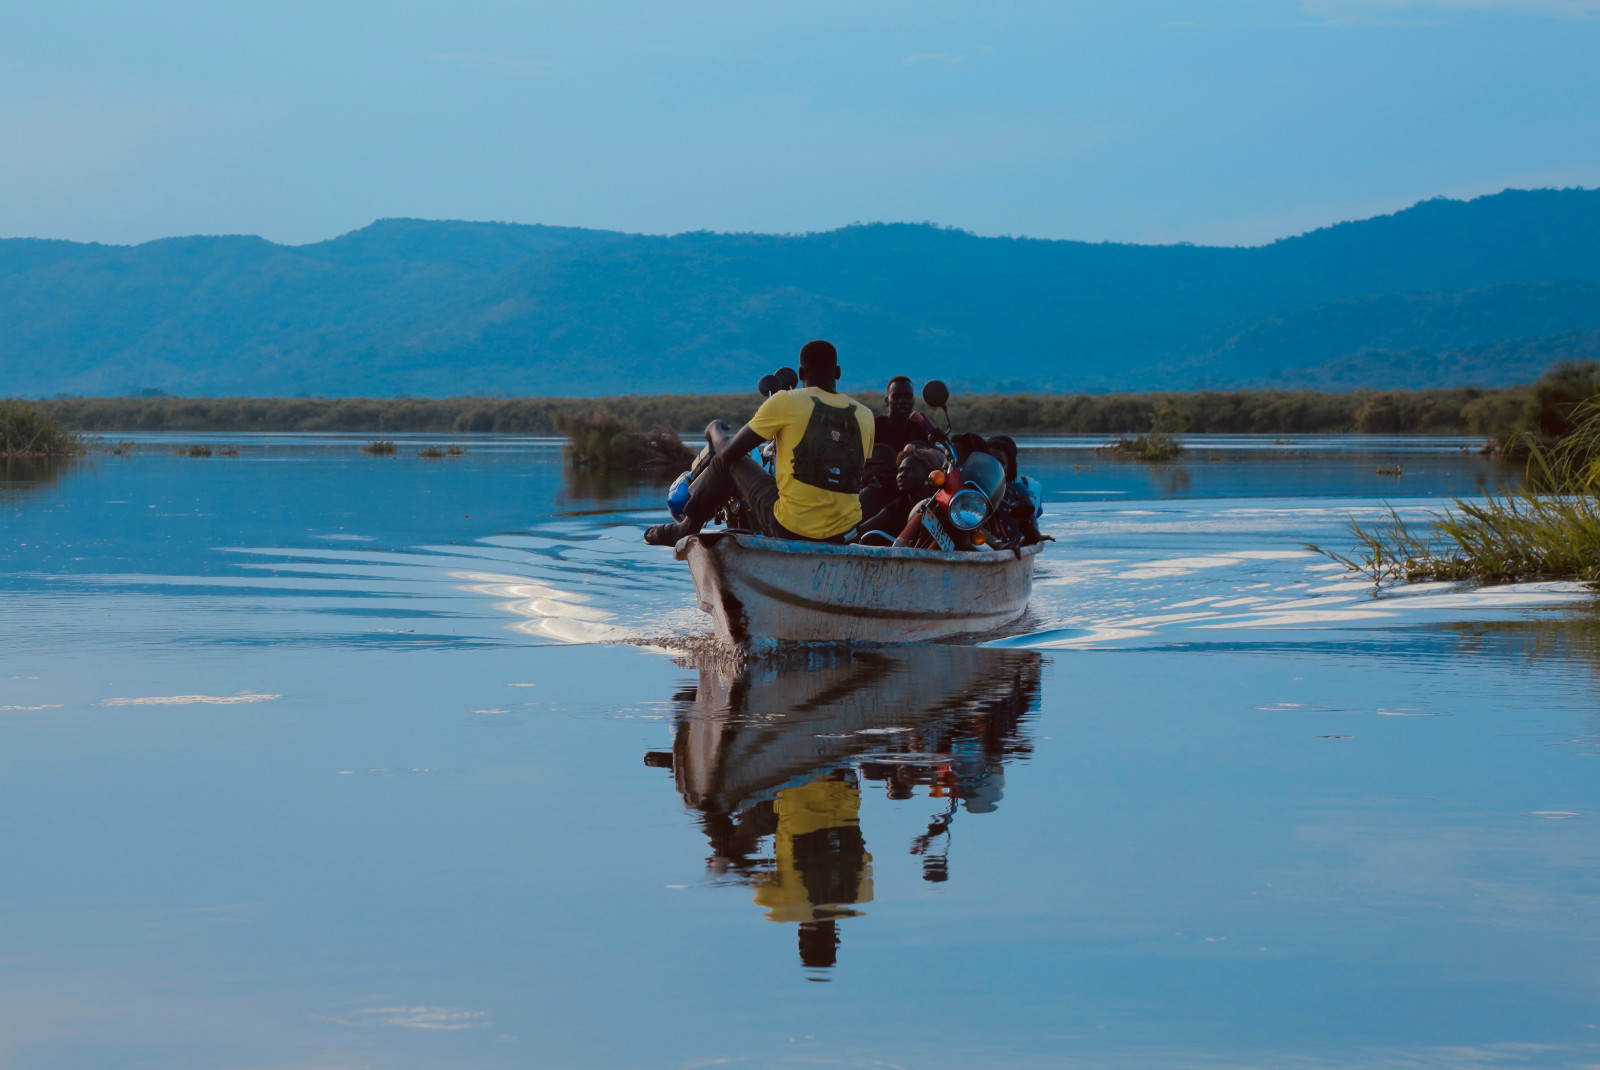 People ride in boat on the water in Uganda